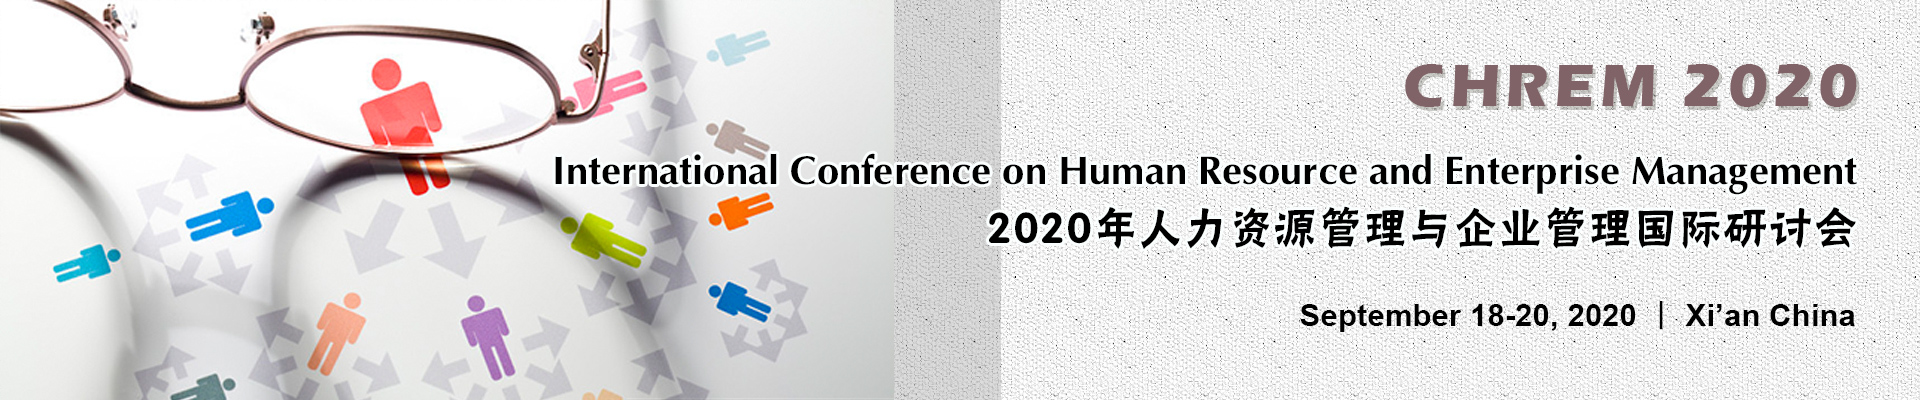 International Conference on Human Resource and Enterprise Management (CHREM 2020), Xi'an, Shaanxi, China